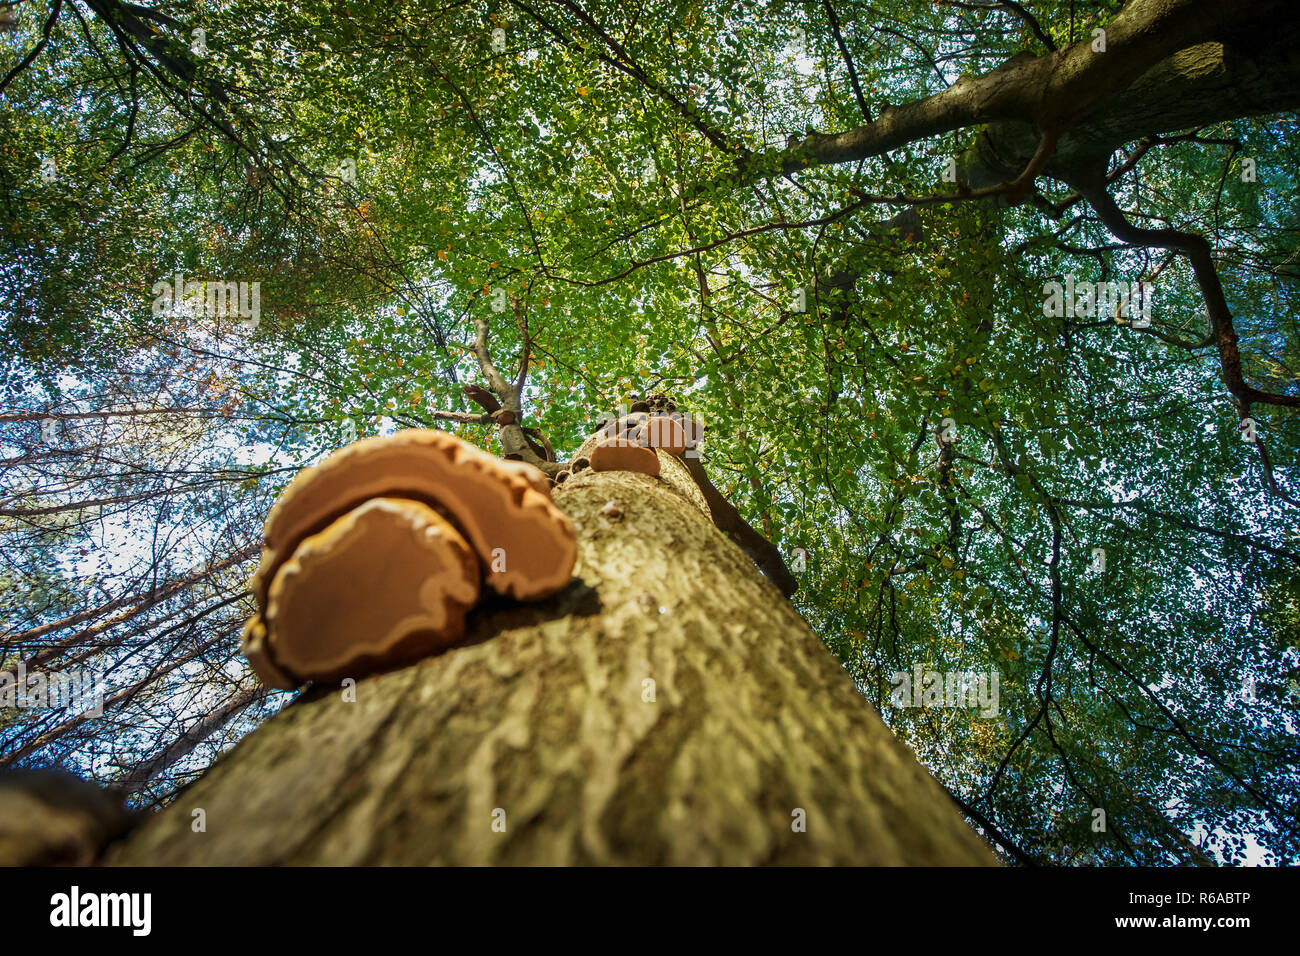 Mushroom photographed from below towards the green foliage with its tree crown and branches against a sunny background Stock Photo